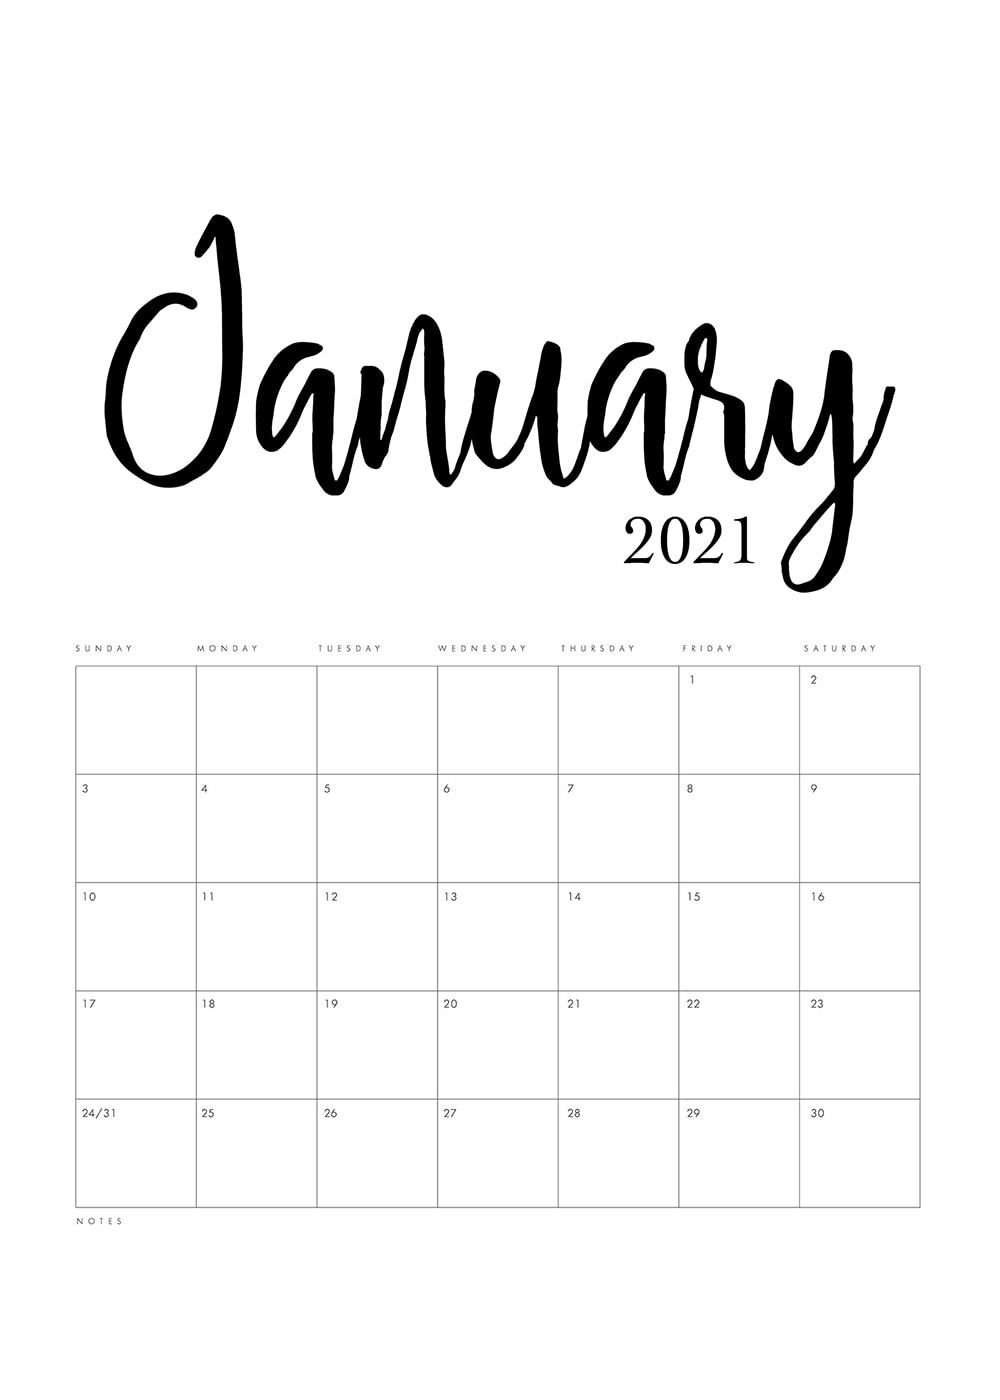 Get 2021 Calendars To Print Without Downloading Best Calendar Example